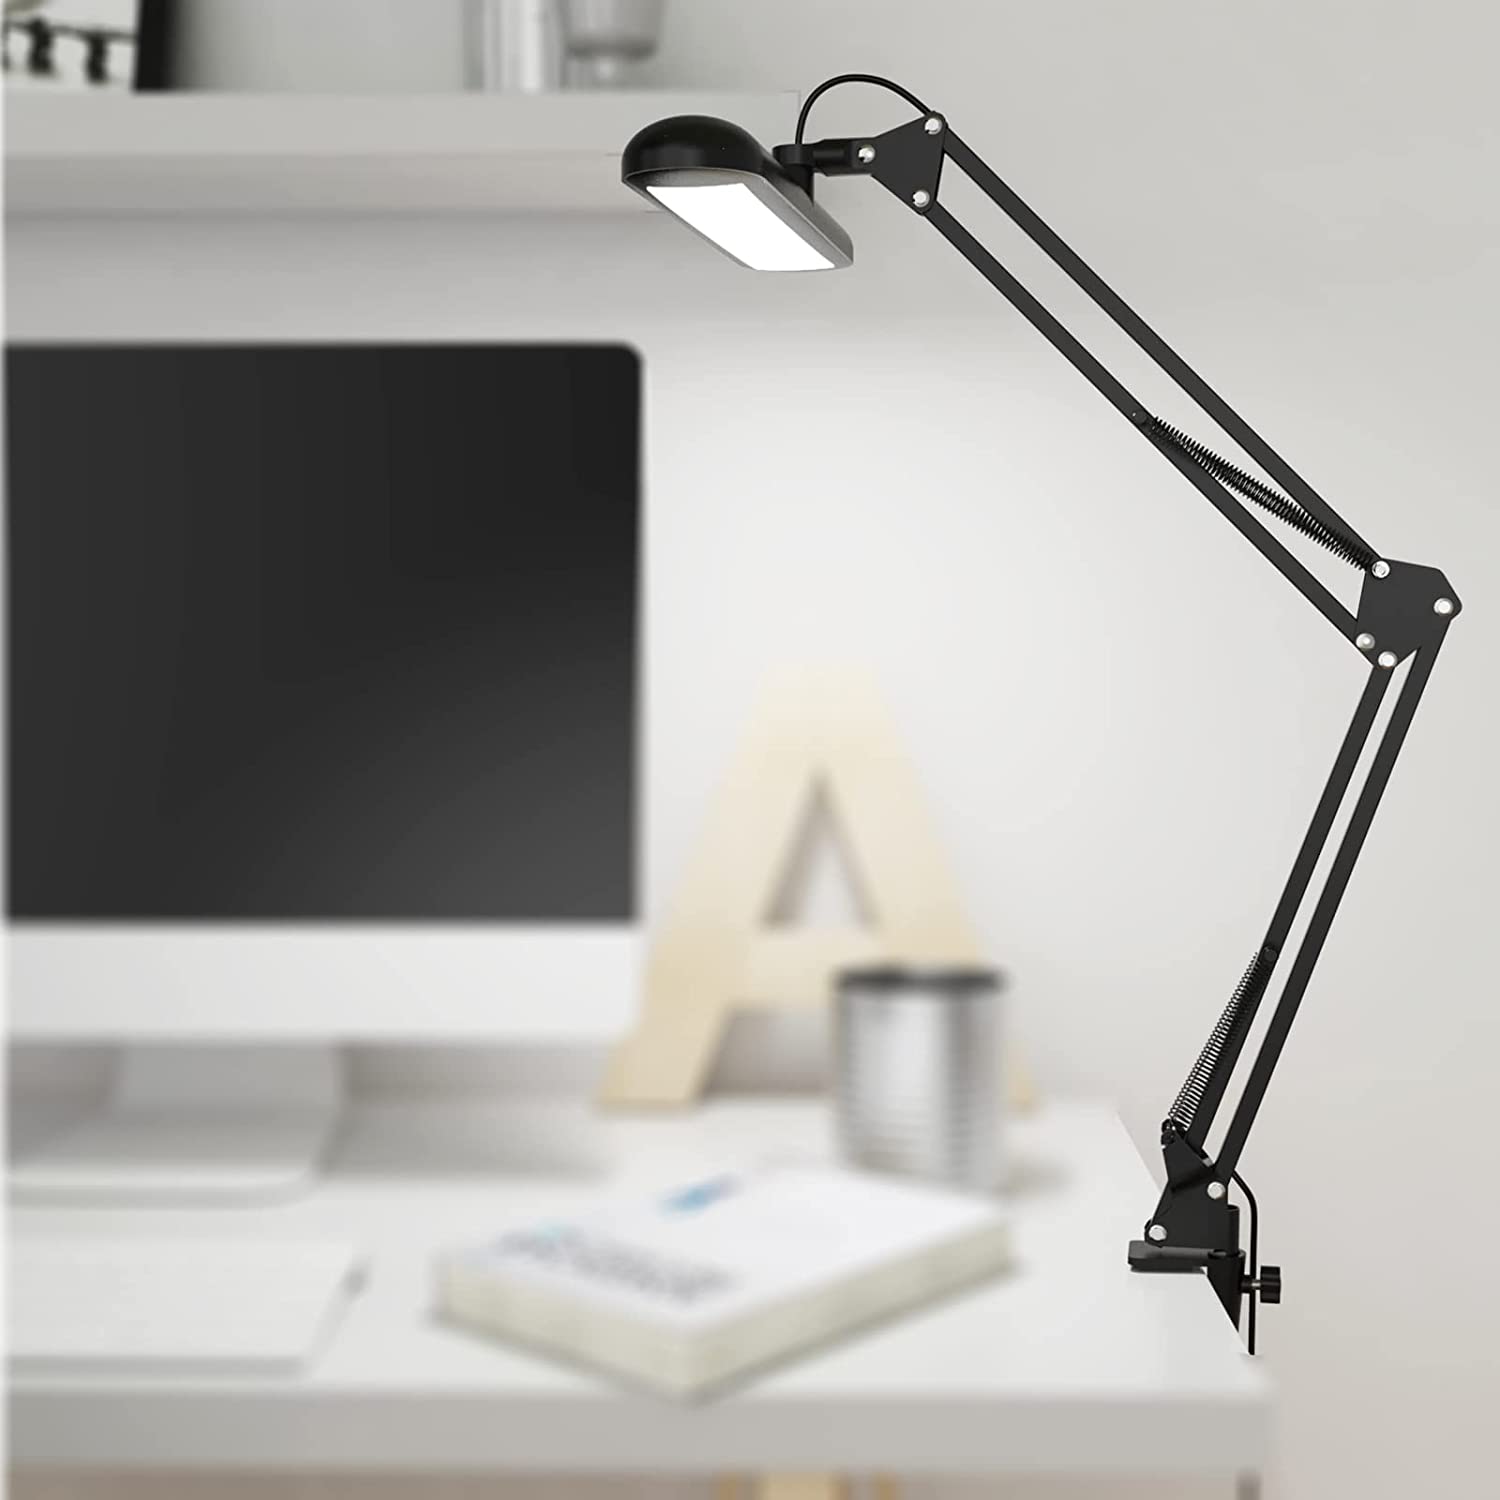 Led Desk Lamp Usb Foldable Clip Read Lamp Metal Stand Long Arm Swing Transversal Screen Eye Protection Light Flexible Classical Table Lamps Indoor Lighting Reading Room Study Book Lampe Work Office